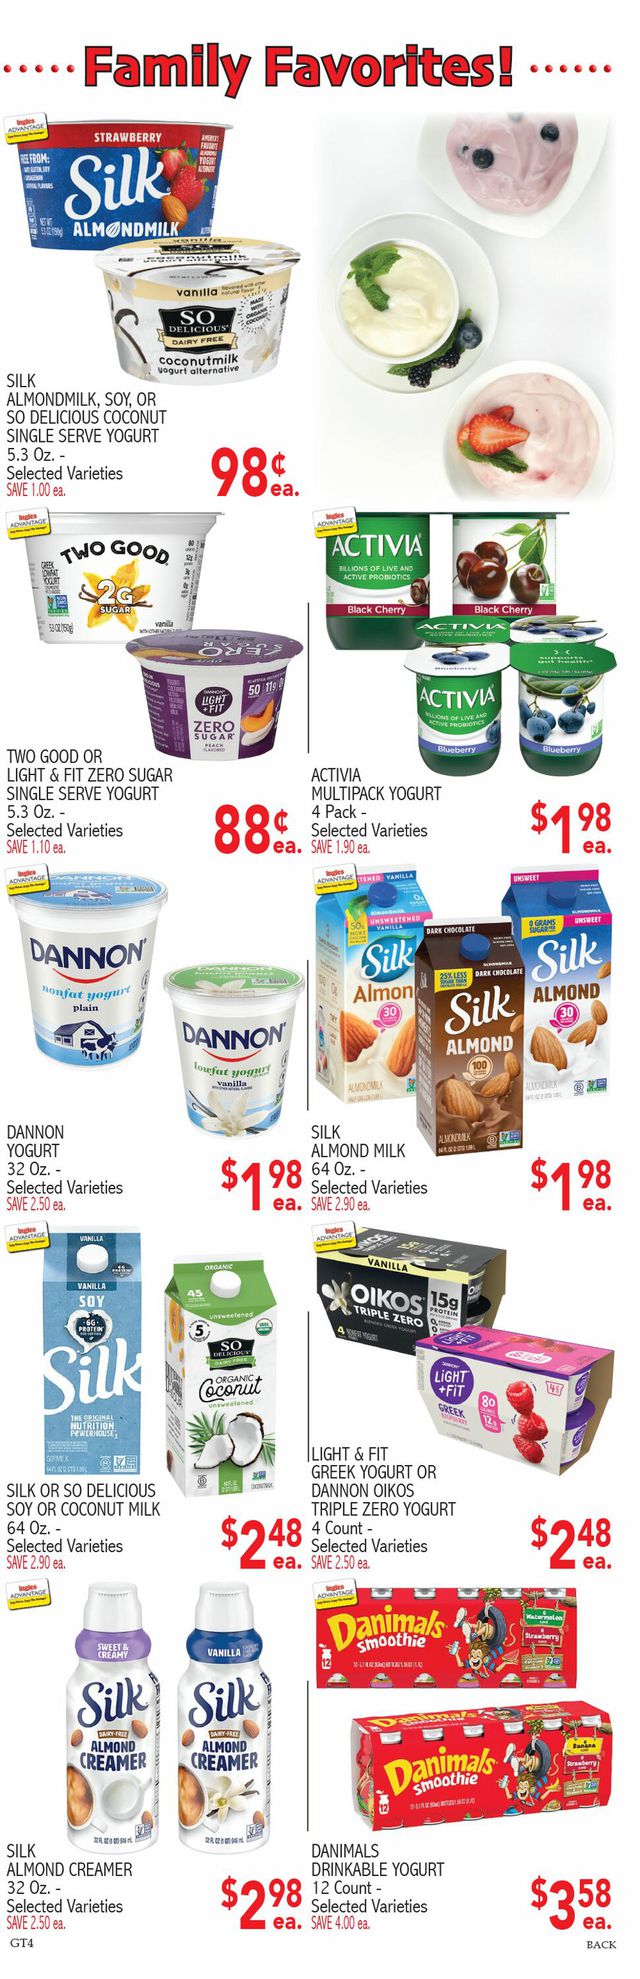 Ingles Ad from 01/11/2023